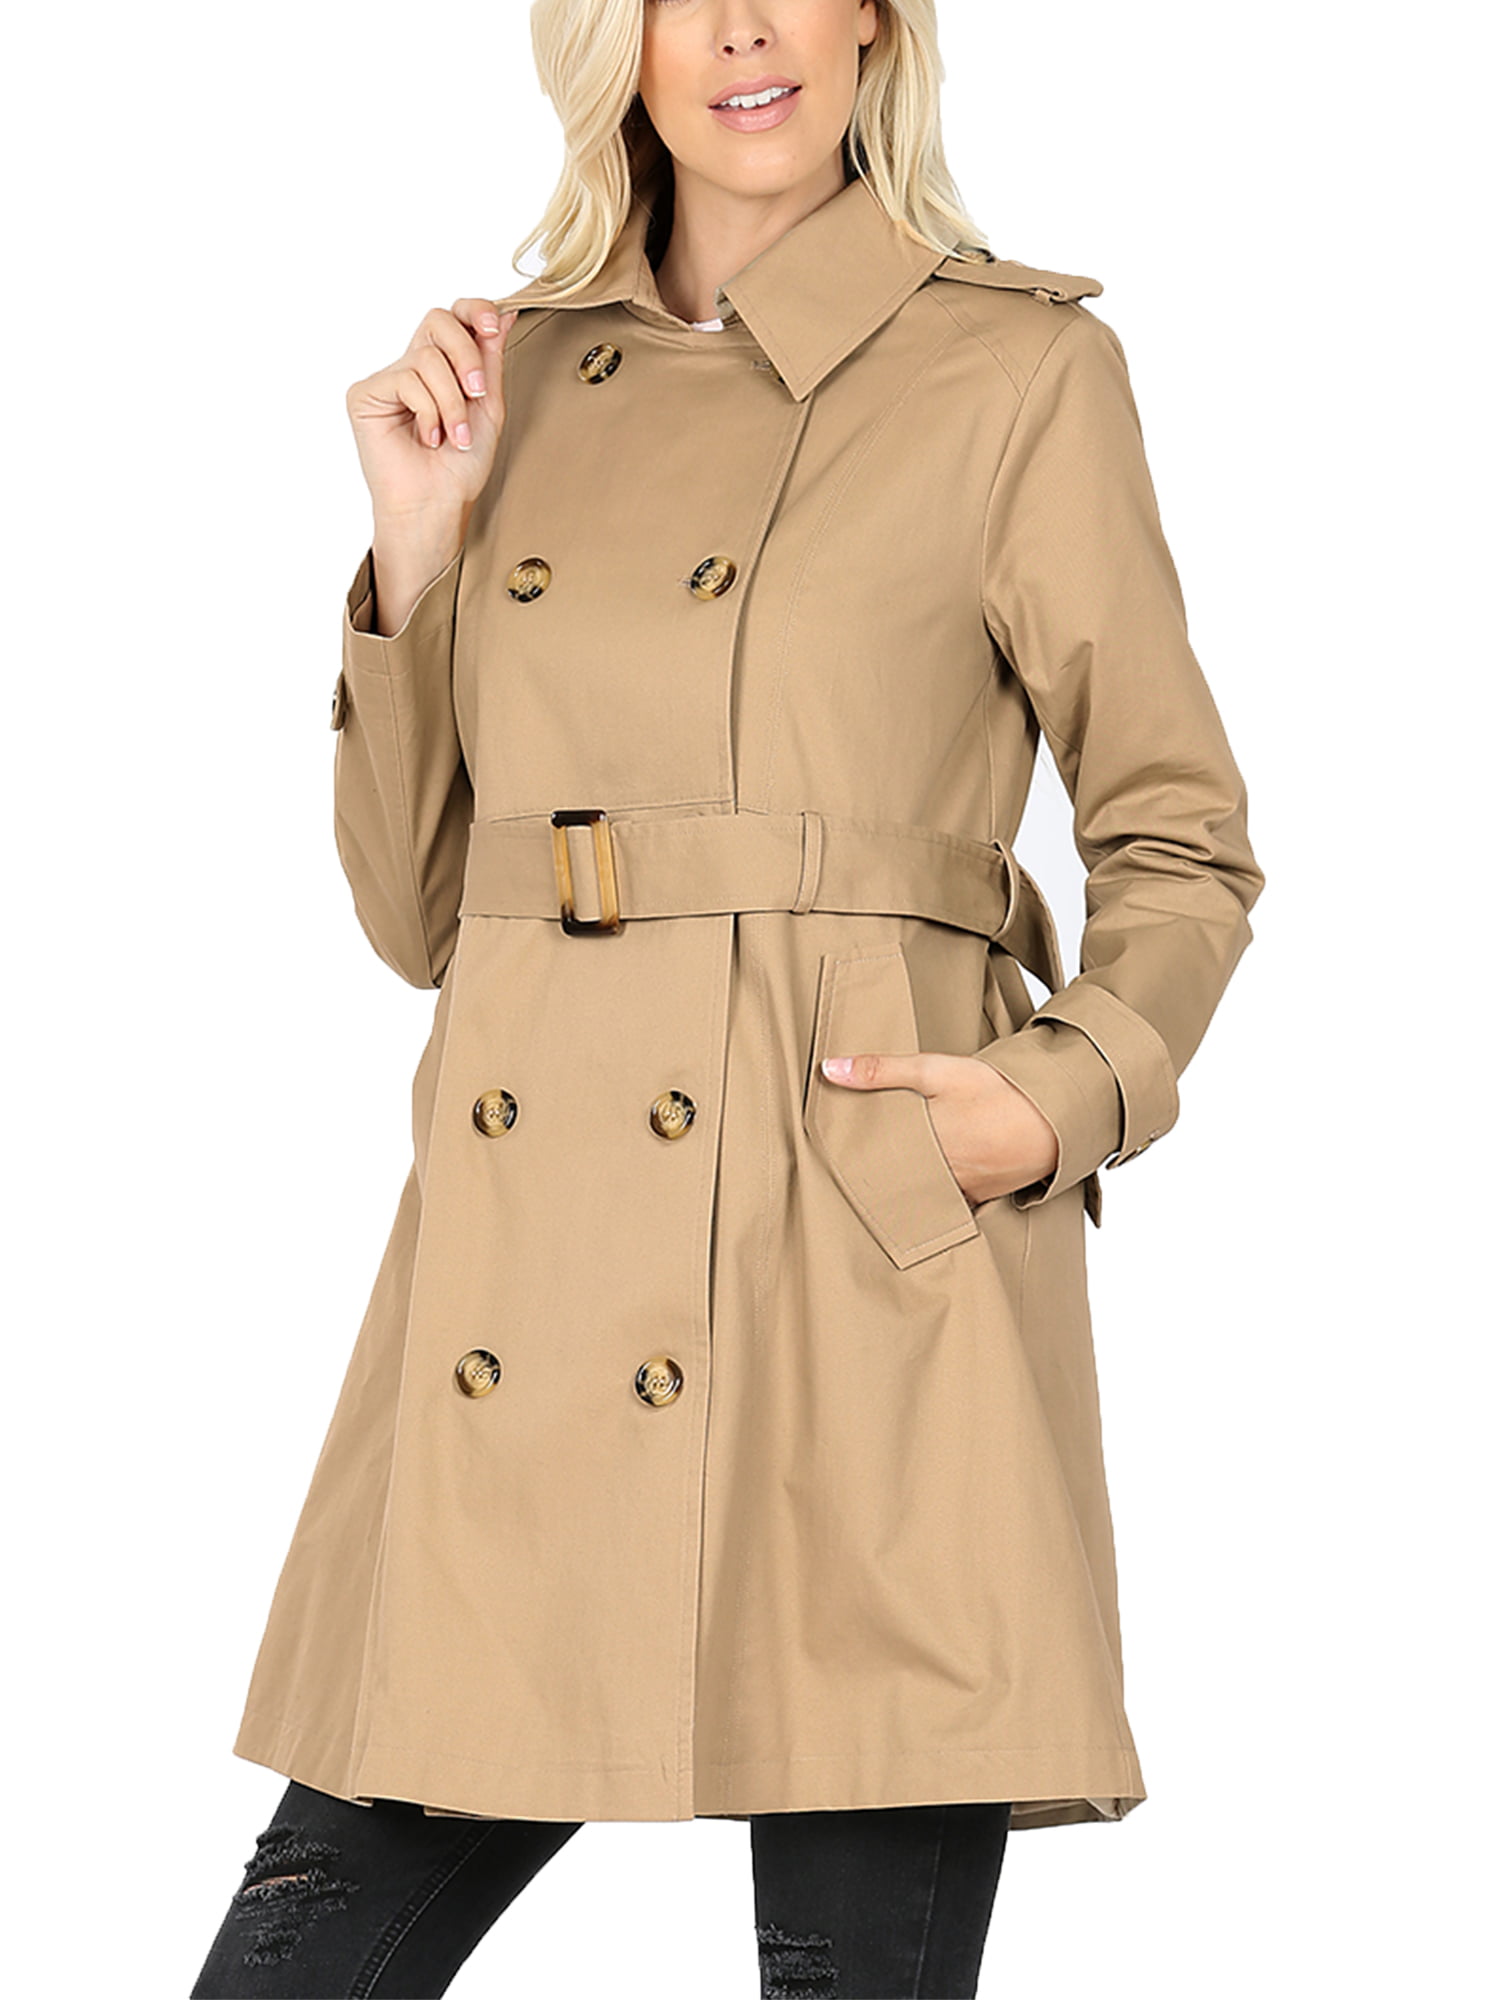 KOGMO Womens Double Breasted Trench Coat Jacket with Waist Belt ...